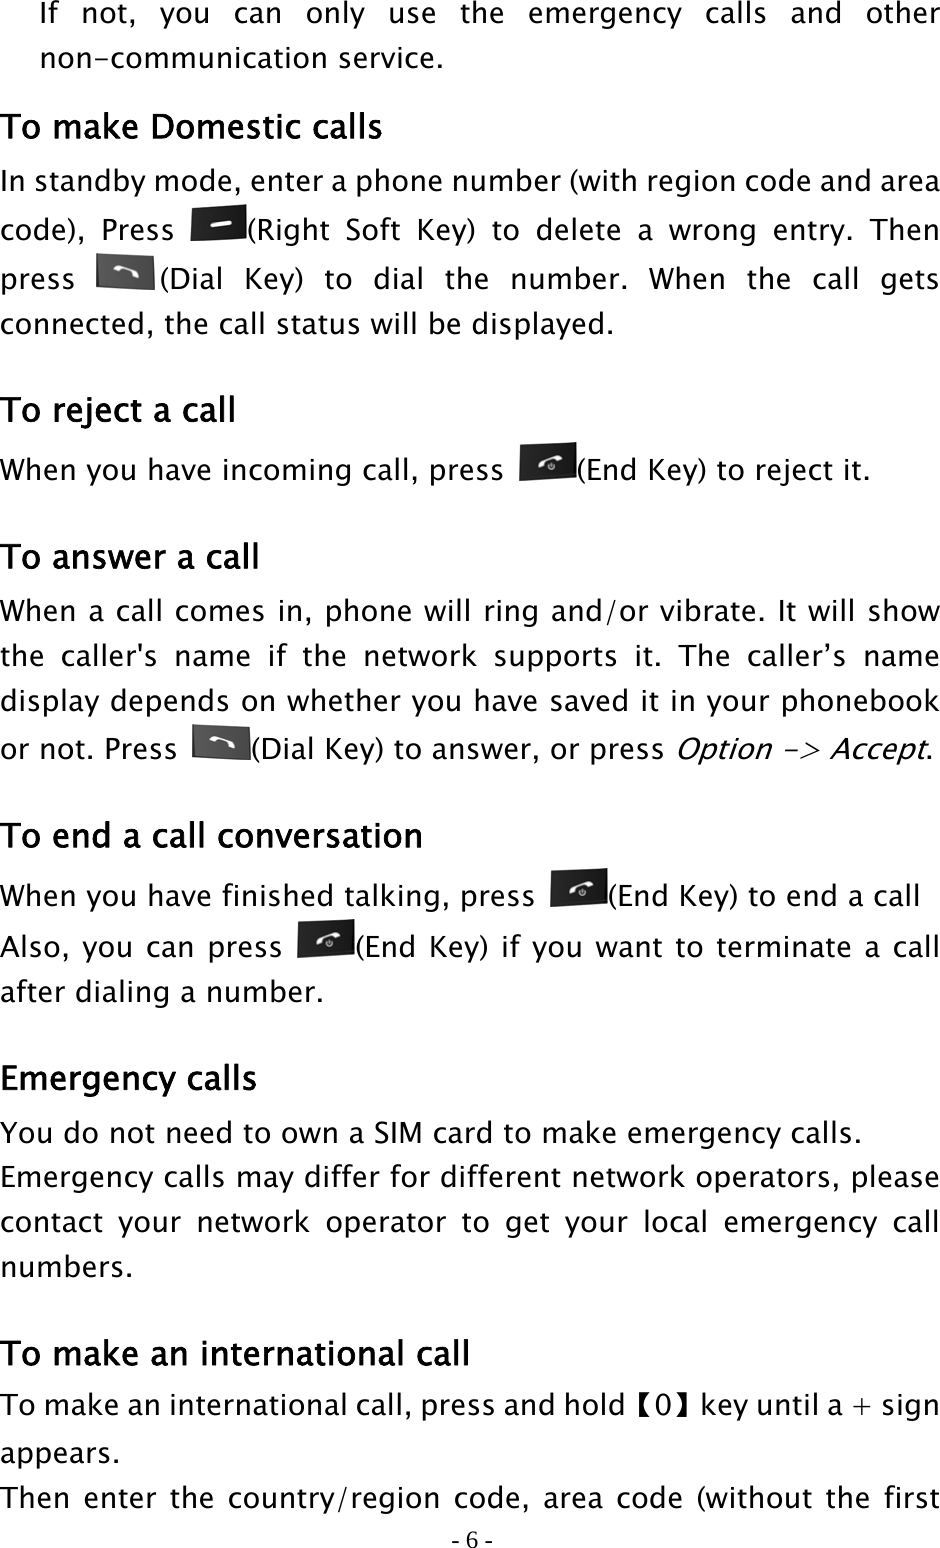 - 6 - If not, you can only use the emergency calls and other non-communication service. To make Domestic calls In standby mode, enter a phone number (with region code and area code), Press  (Right Soft Key) to delete a wrong entry. Then press  (Dial Key) to dial the number. When the call gets connected, the call status will be displayed.   To reject a call When you have incoming call, press  (End Key) to reject it.  To answer a call When a call comes in, phone will ring and/or vibrate. It will show the caller&apos;s name if the network supports it. The caller’s name display depends on whether you have saved it in your phonebook or not. Press  (Dial Key) to answer, or press Option -&gt; Accept.  To end a call conversation When you have finished talking, press  (End Key) to end a call Also, you can press  (End Key) if you want to terminate a call after dialing a number.  Emergency calls You do not need to own a SIM card to make emergency calls. Emergency calls may differ for different network operators, please contact your network operator to get your local emergency call numbers.  To make an international call To make an international call, press and hold【0】key until a + sign appears. Then enter the country/region code, area code (without the first 